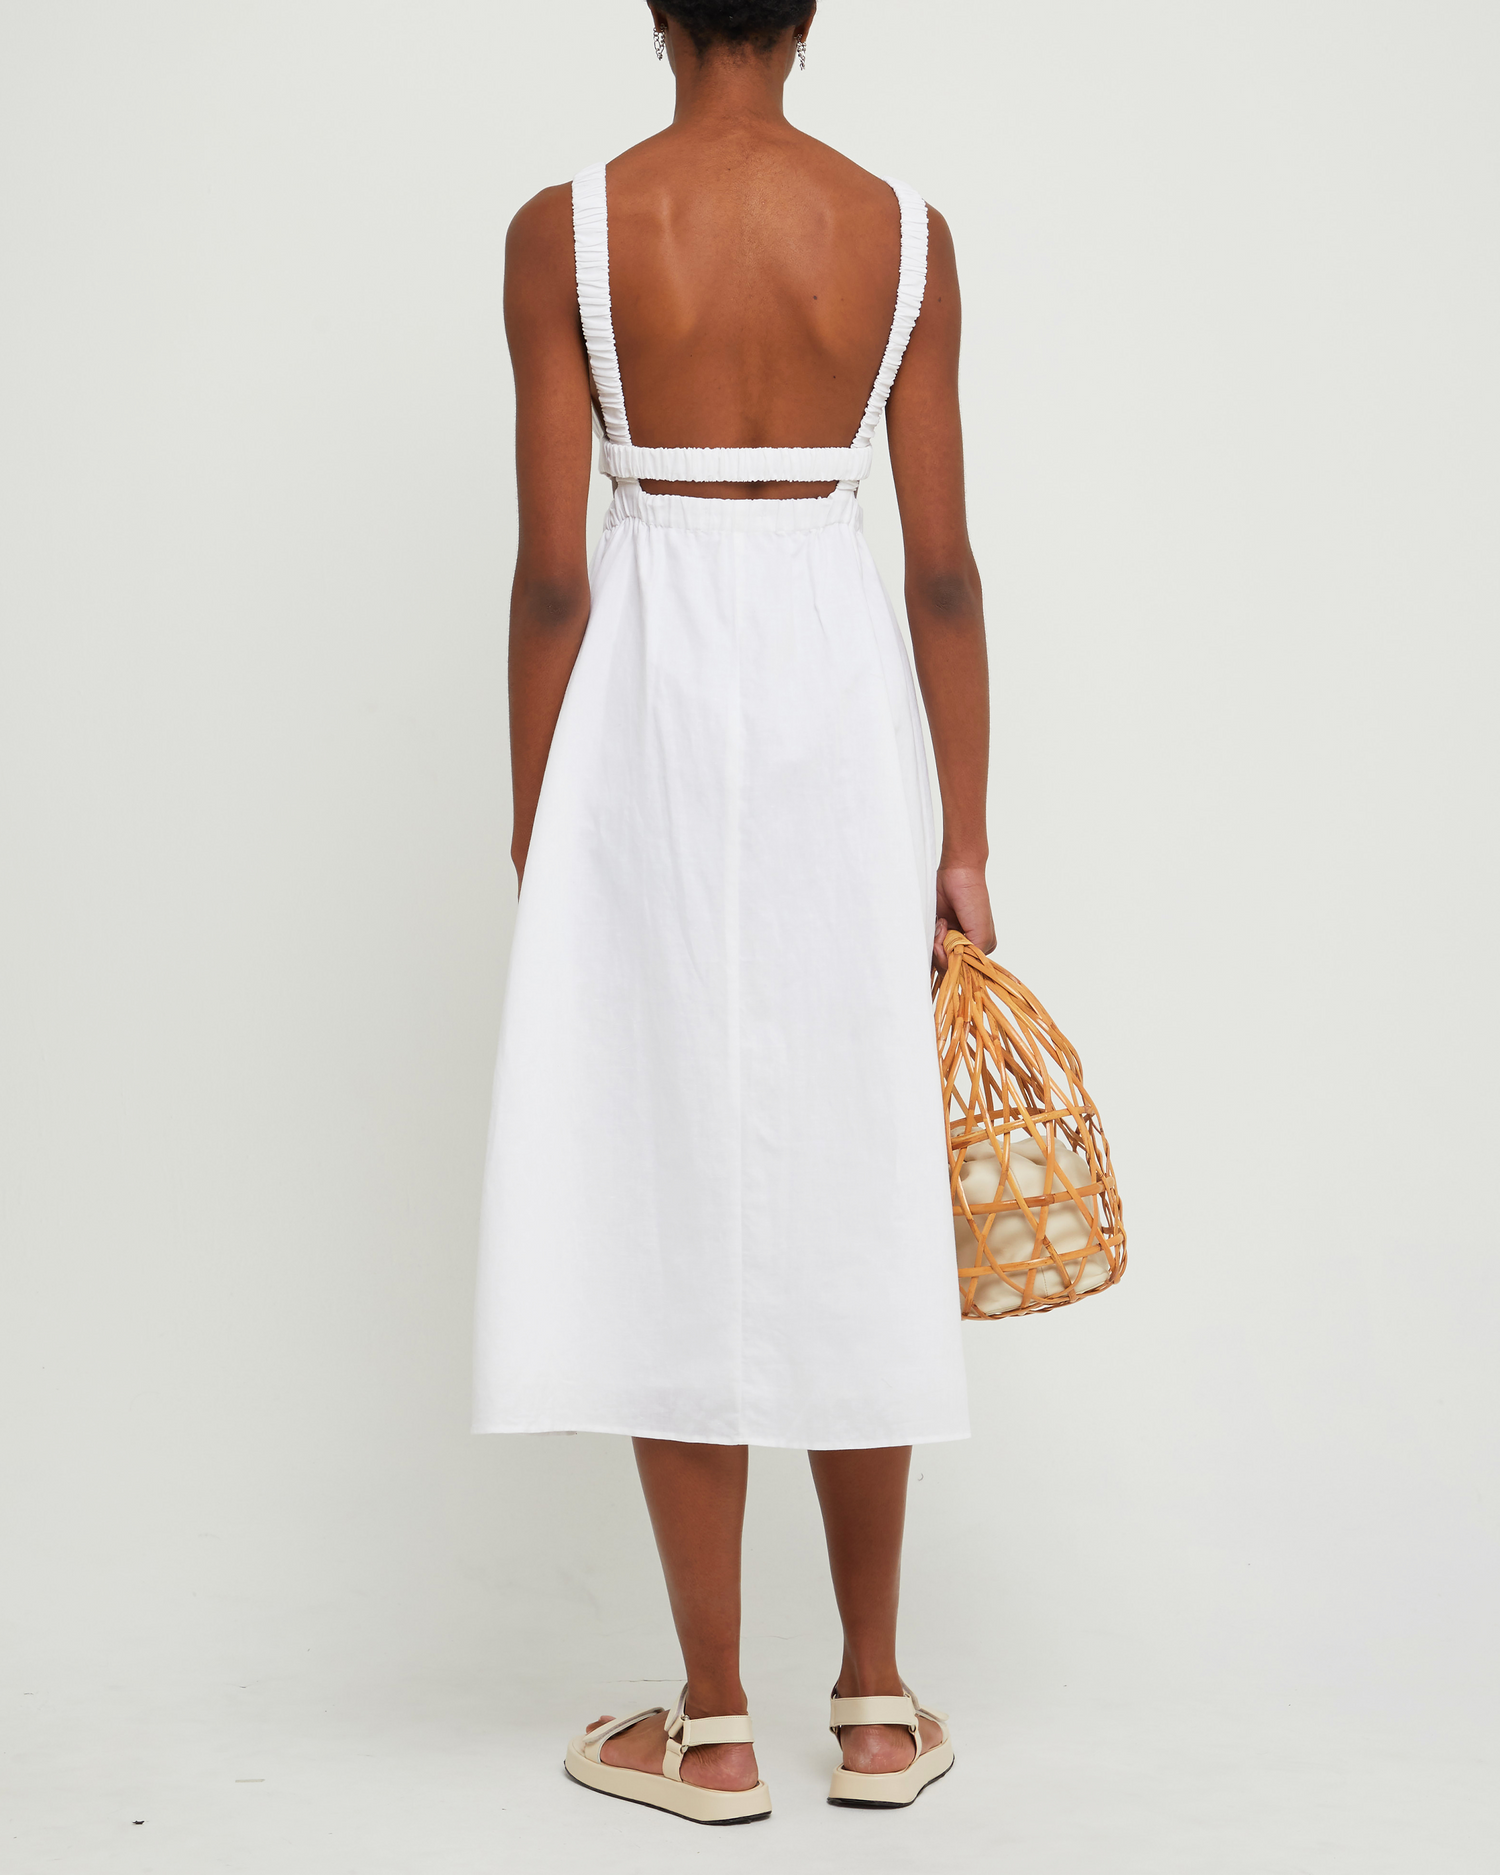 Fifth image of Aubrielle Dress, a white midi dress, open back, cut out, high neckline, sleeveless